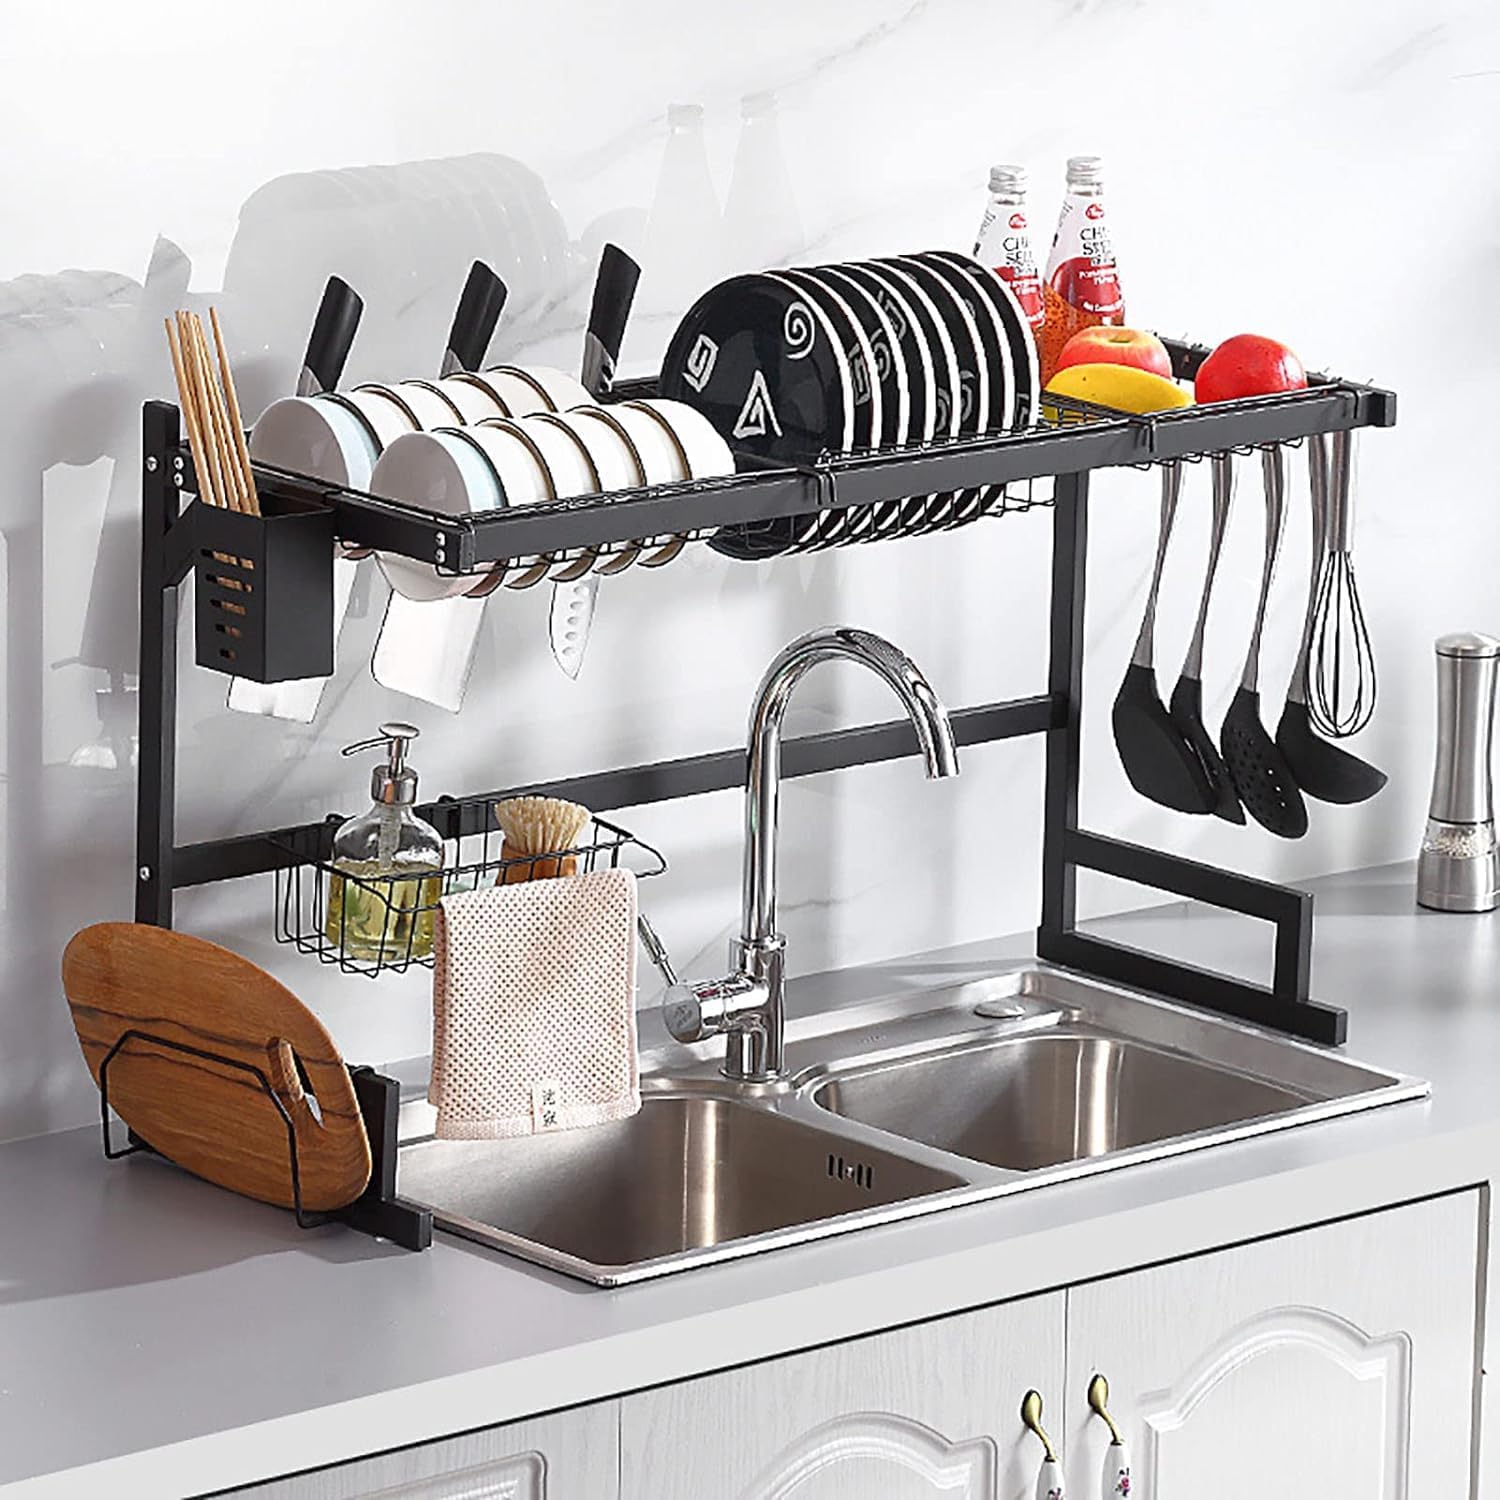 Over the Sink Dish Drying Rack Dish rack, Kitchen Sink Organizer, Draining rack Metal With cutlery holder Detachable Rustproof Suitable For Use Such As Cutting Boards Knives Utensils And Sponges